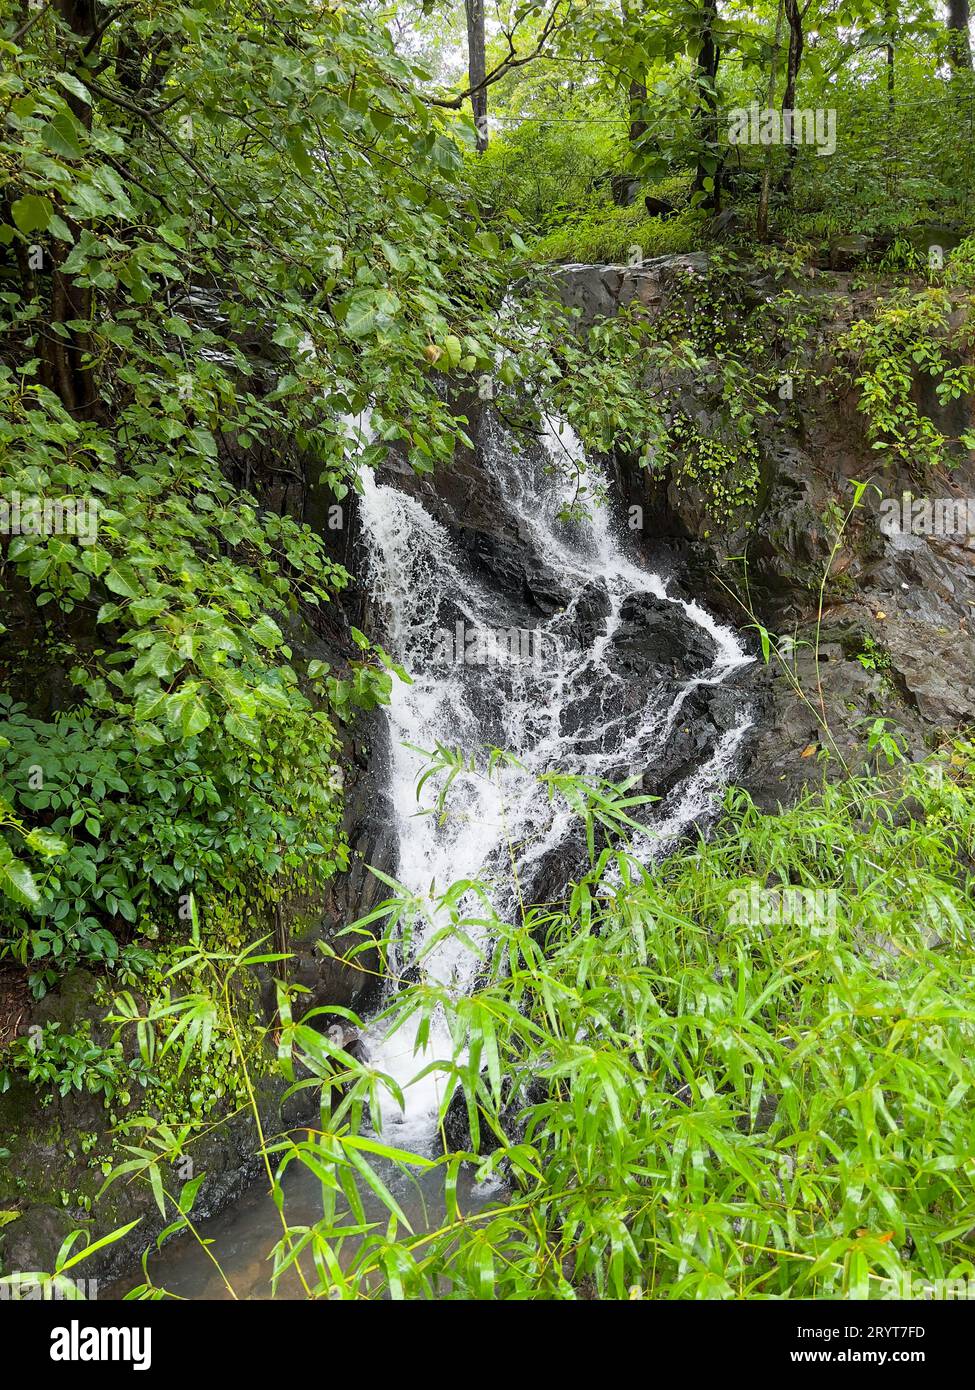 Beautiful small waterfall surrounded by lush green vegetation during the monsoon season. Stock Photo